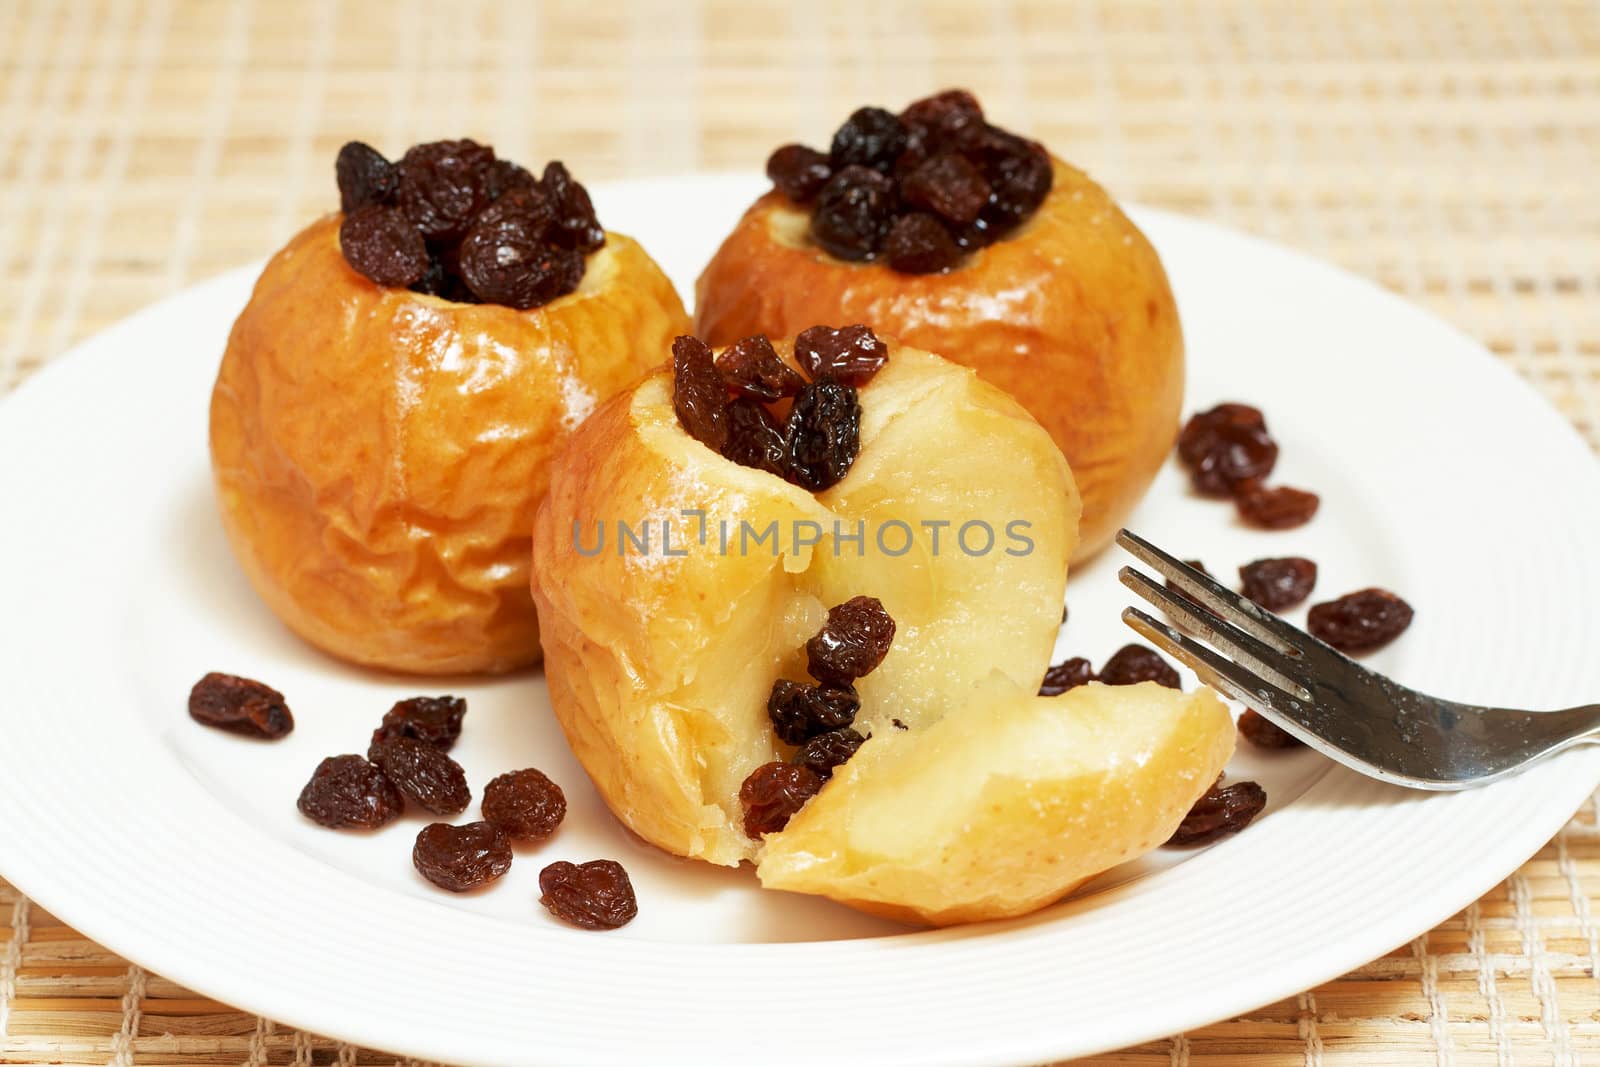 Delicious dessert of freshly baked organic apples with raisins